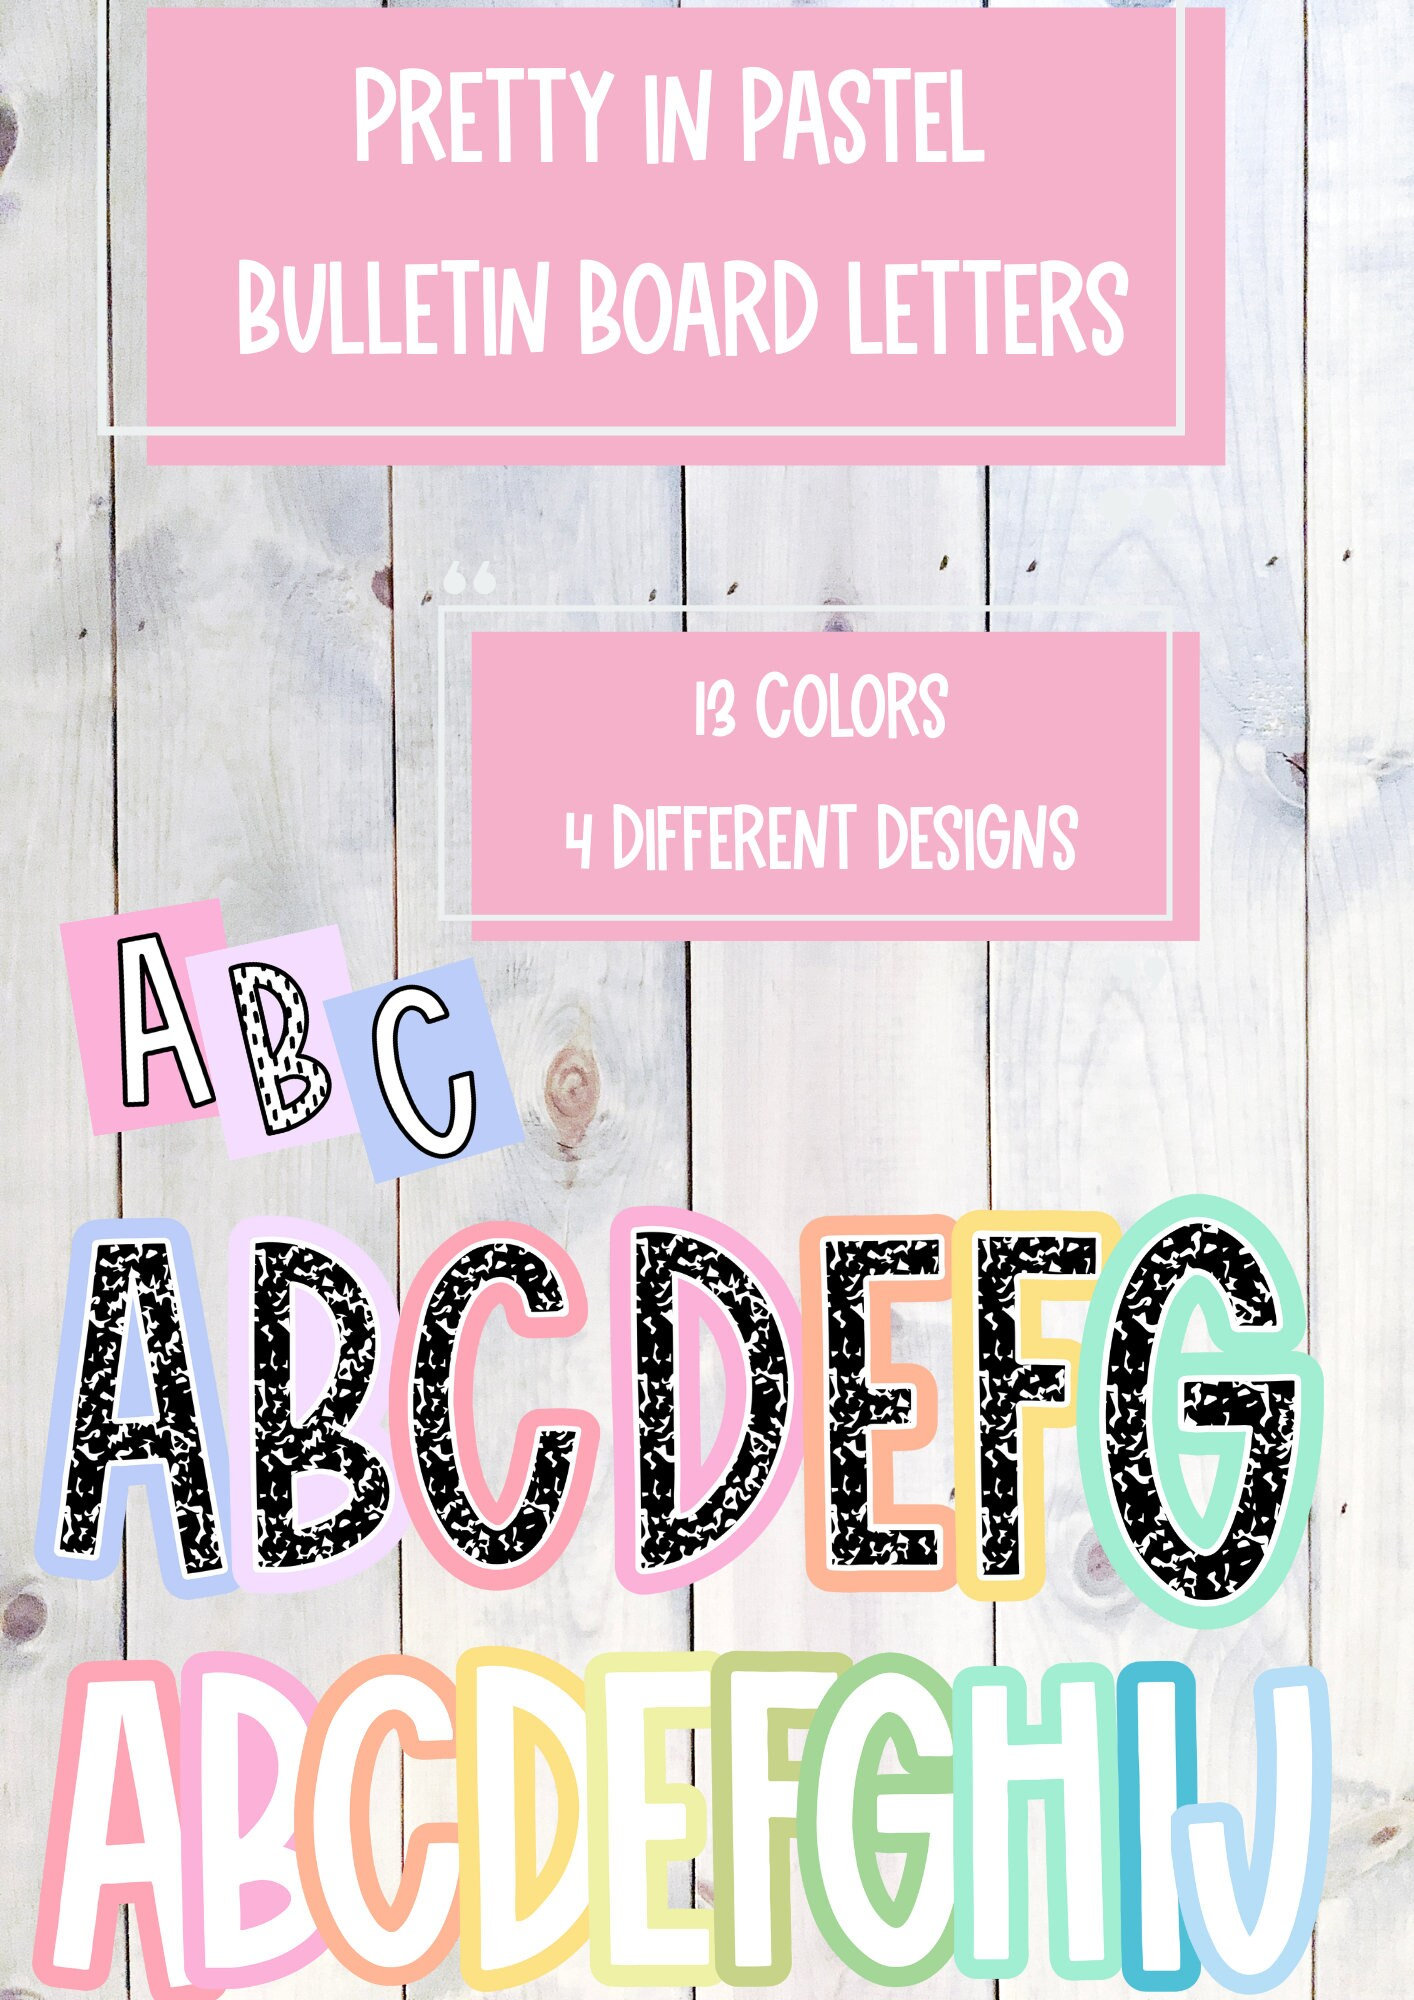 Printable magnetic sheets from Avery + poster board letters +